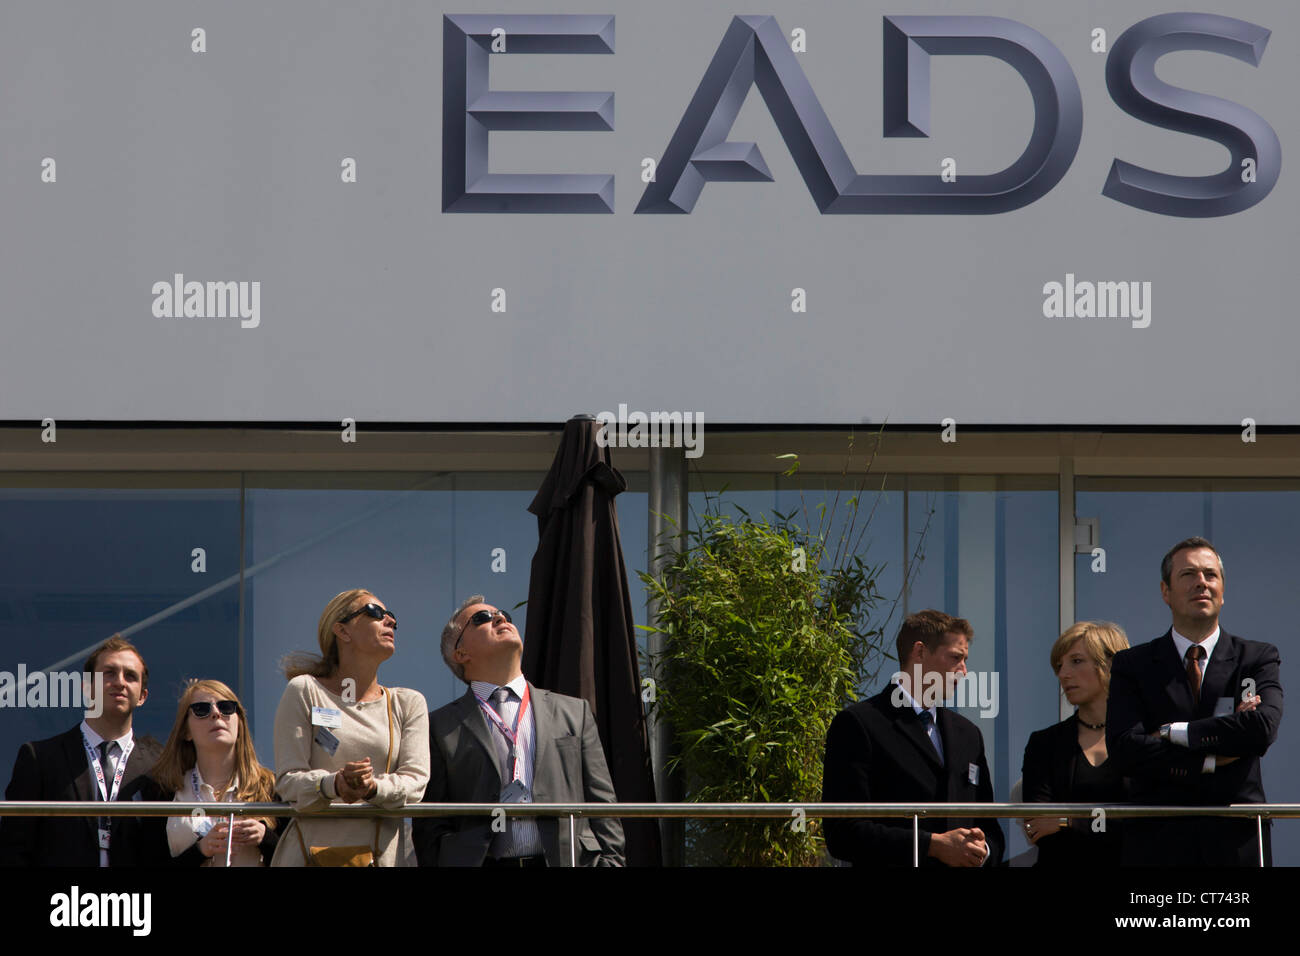 Guests admire aerobatic flying displays outside the EADS hospitality chalet at the Farnborough Air Show Stock Photo